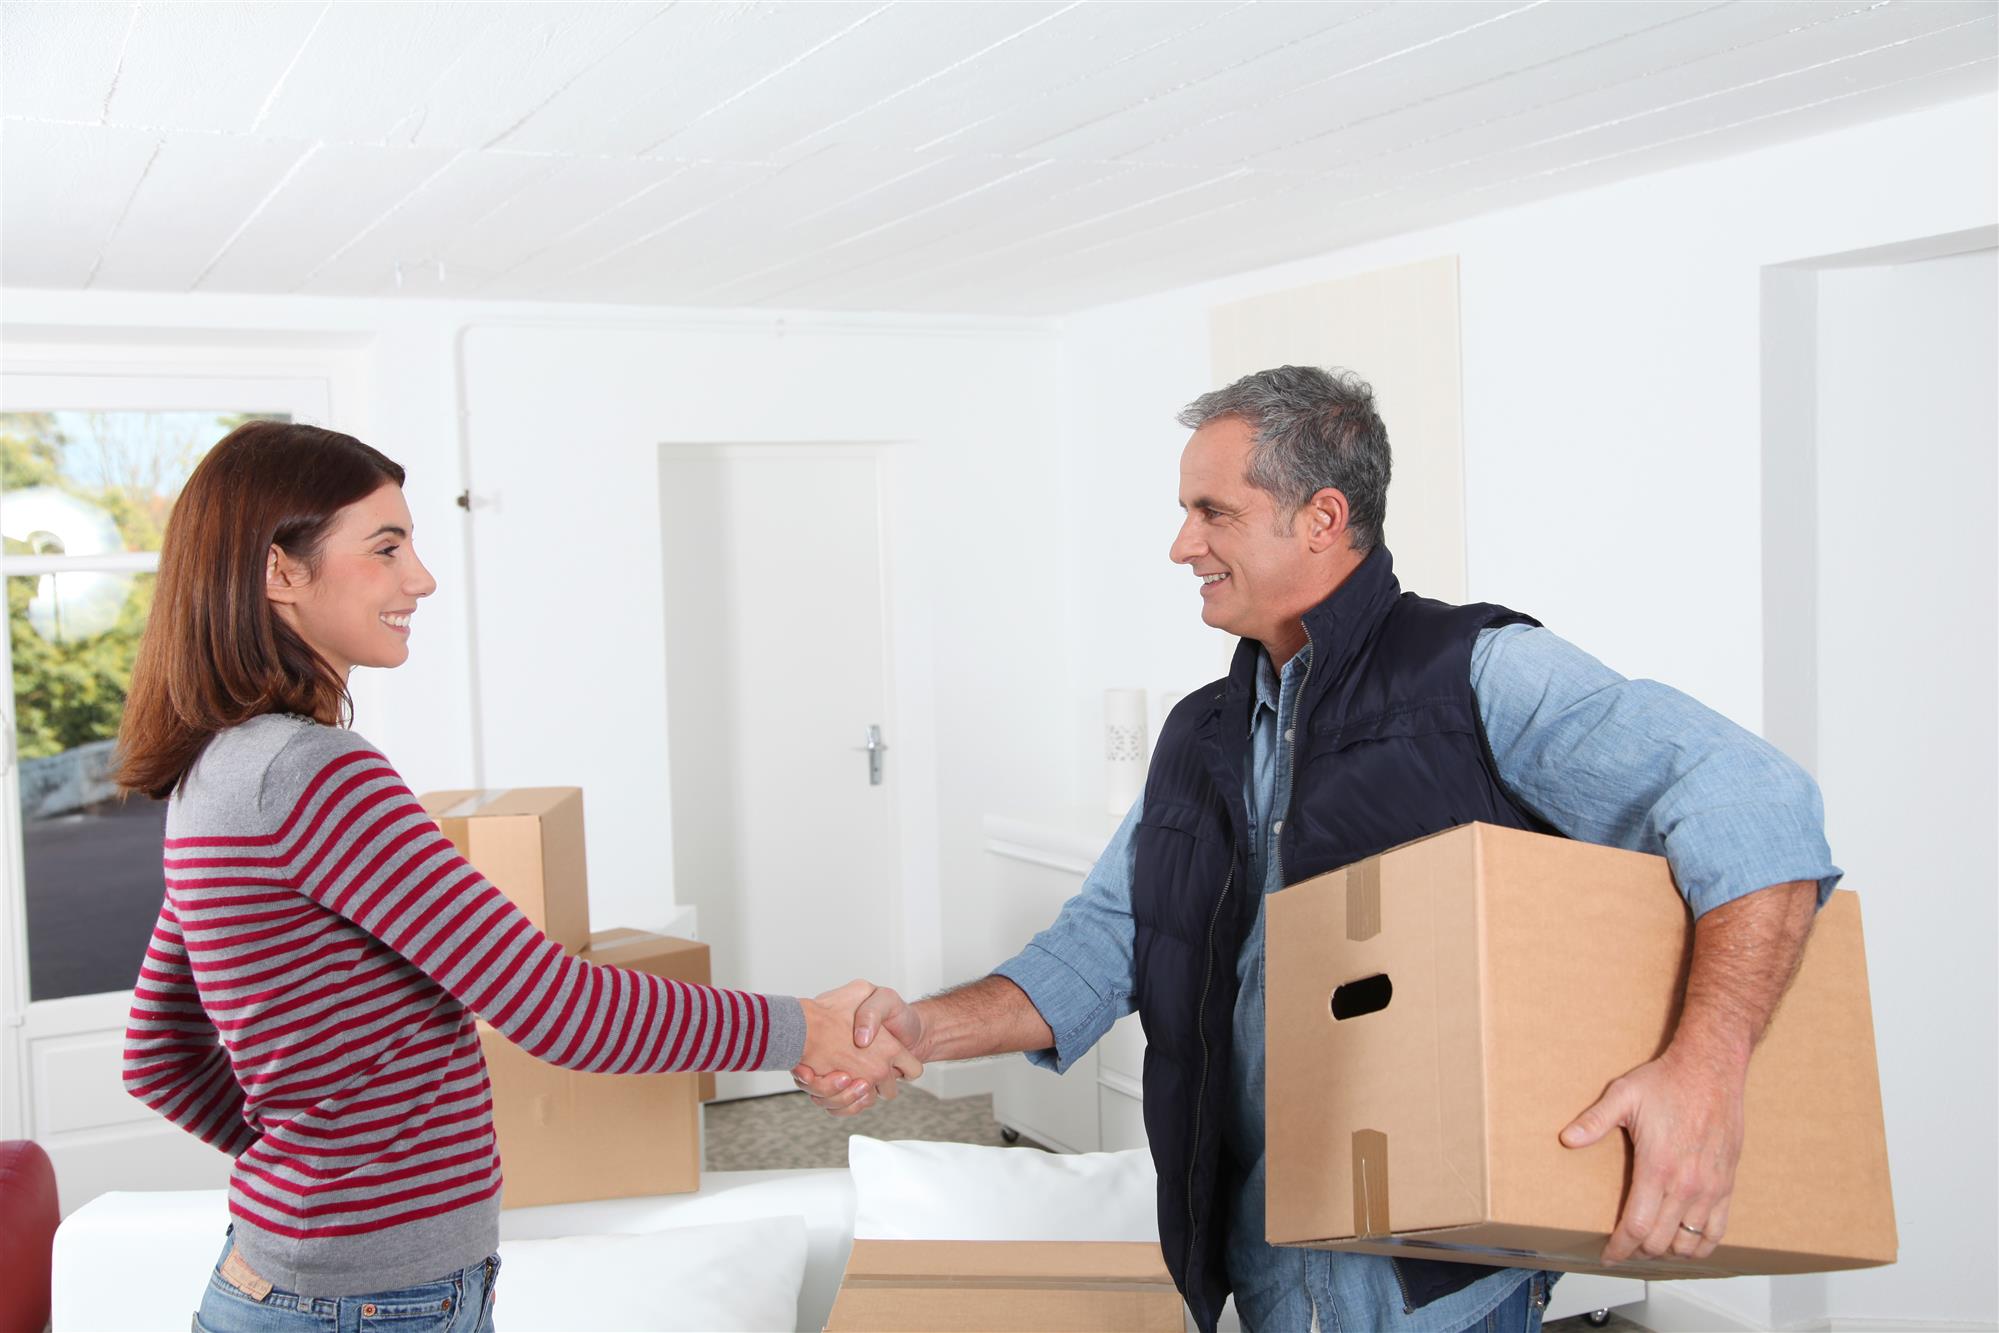 man holding storage box shaking hand with woman